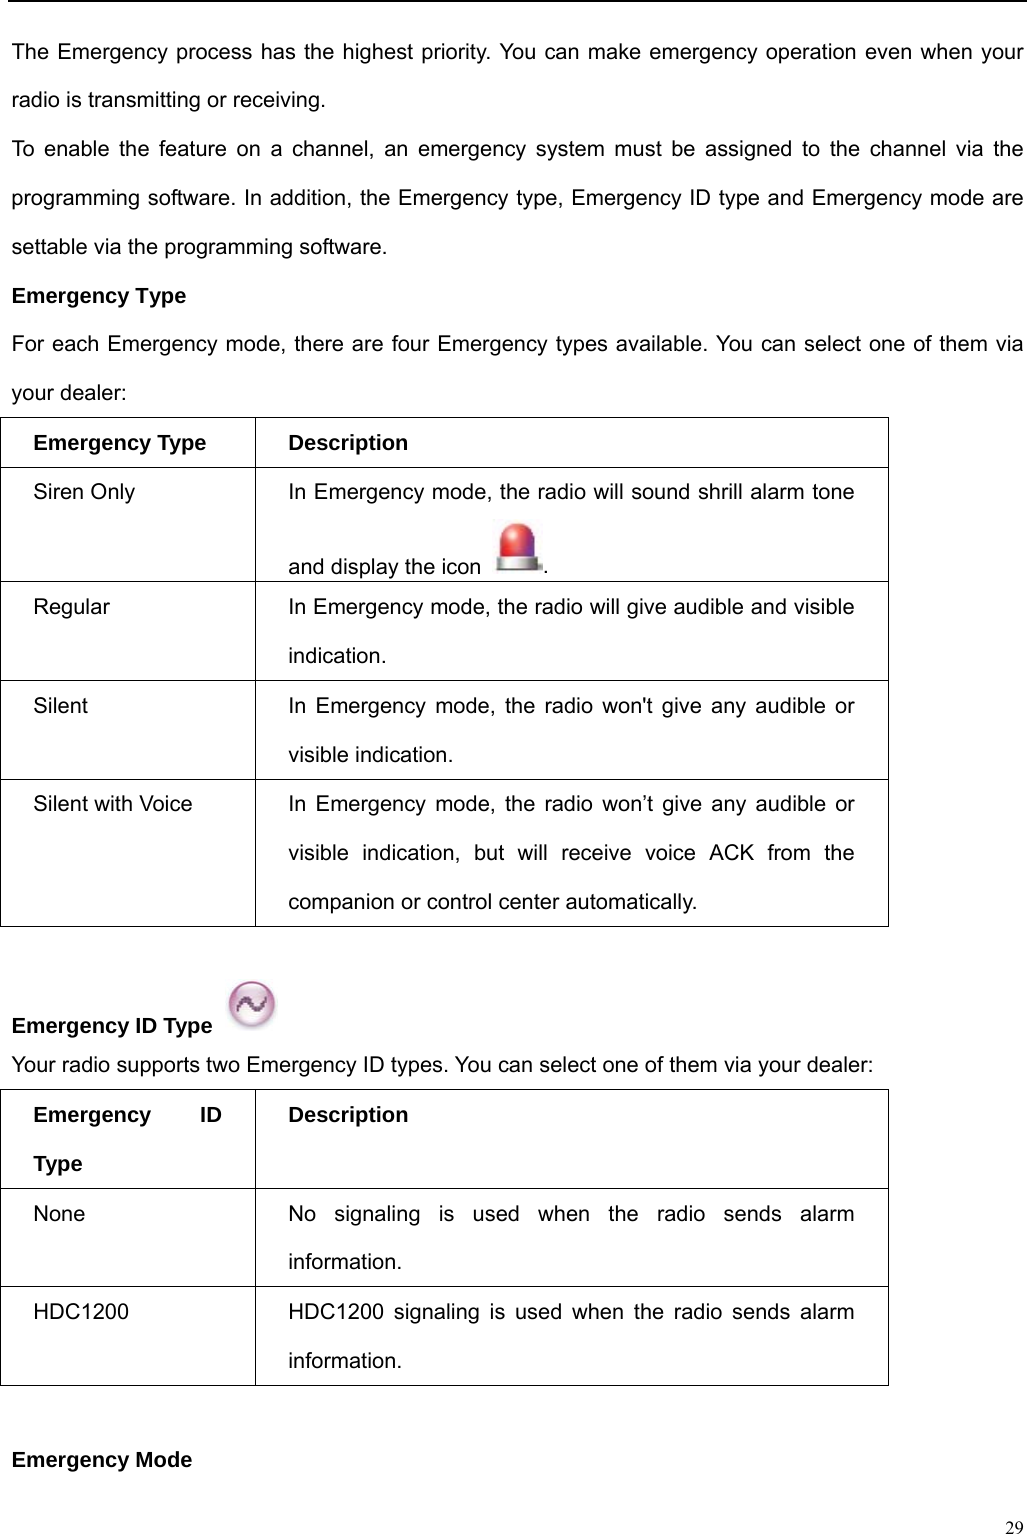                                                                                                            The Emergency process has the highest priority. You can make emergency operation even when your radio is transmitting or receiving.   To enable the feature on a channel, an emergency system must be assigned to the channel via the programming software. In addition, the Emergency type, Emergency ID type and Emergency mode are settable via the programming software.   Emergency Type For each Emergency mode, there are four Emergency types available. You can select one of them via your dealer:   Emergency Type Description Siren Only In Emergency mode, the radio will sound shrill alarm tone and display the icon  .   Regular In Emergency mode, the radio will give audible and visible indication.   Silent In Emergency mode, the radio won&apos;t give any audible or visible indication.   Silent with Voice In Emergency mode, the radio won’t give any audible or visible indication, but will receive voice ACK from the companion or control center automatically.    Emergency ID Type   Your radio supports two Emergency ID types. You can select one of them via your dealer:   Emergency ID Type Description None No signaling is used when the radio sends alarm information. HDC1200 HDC1200 signaling is used when the radio sends alarm information.  Emergency Mode   29